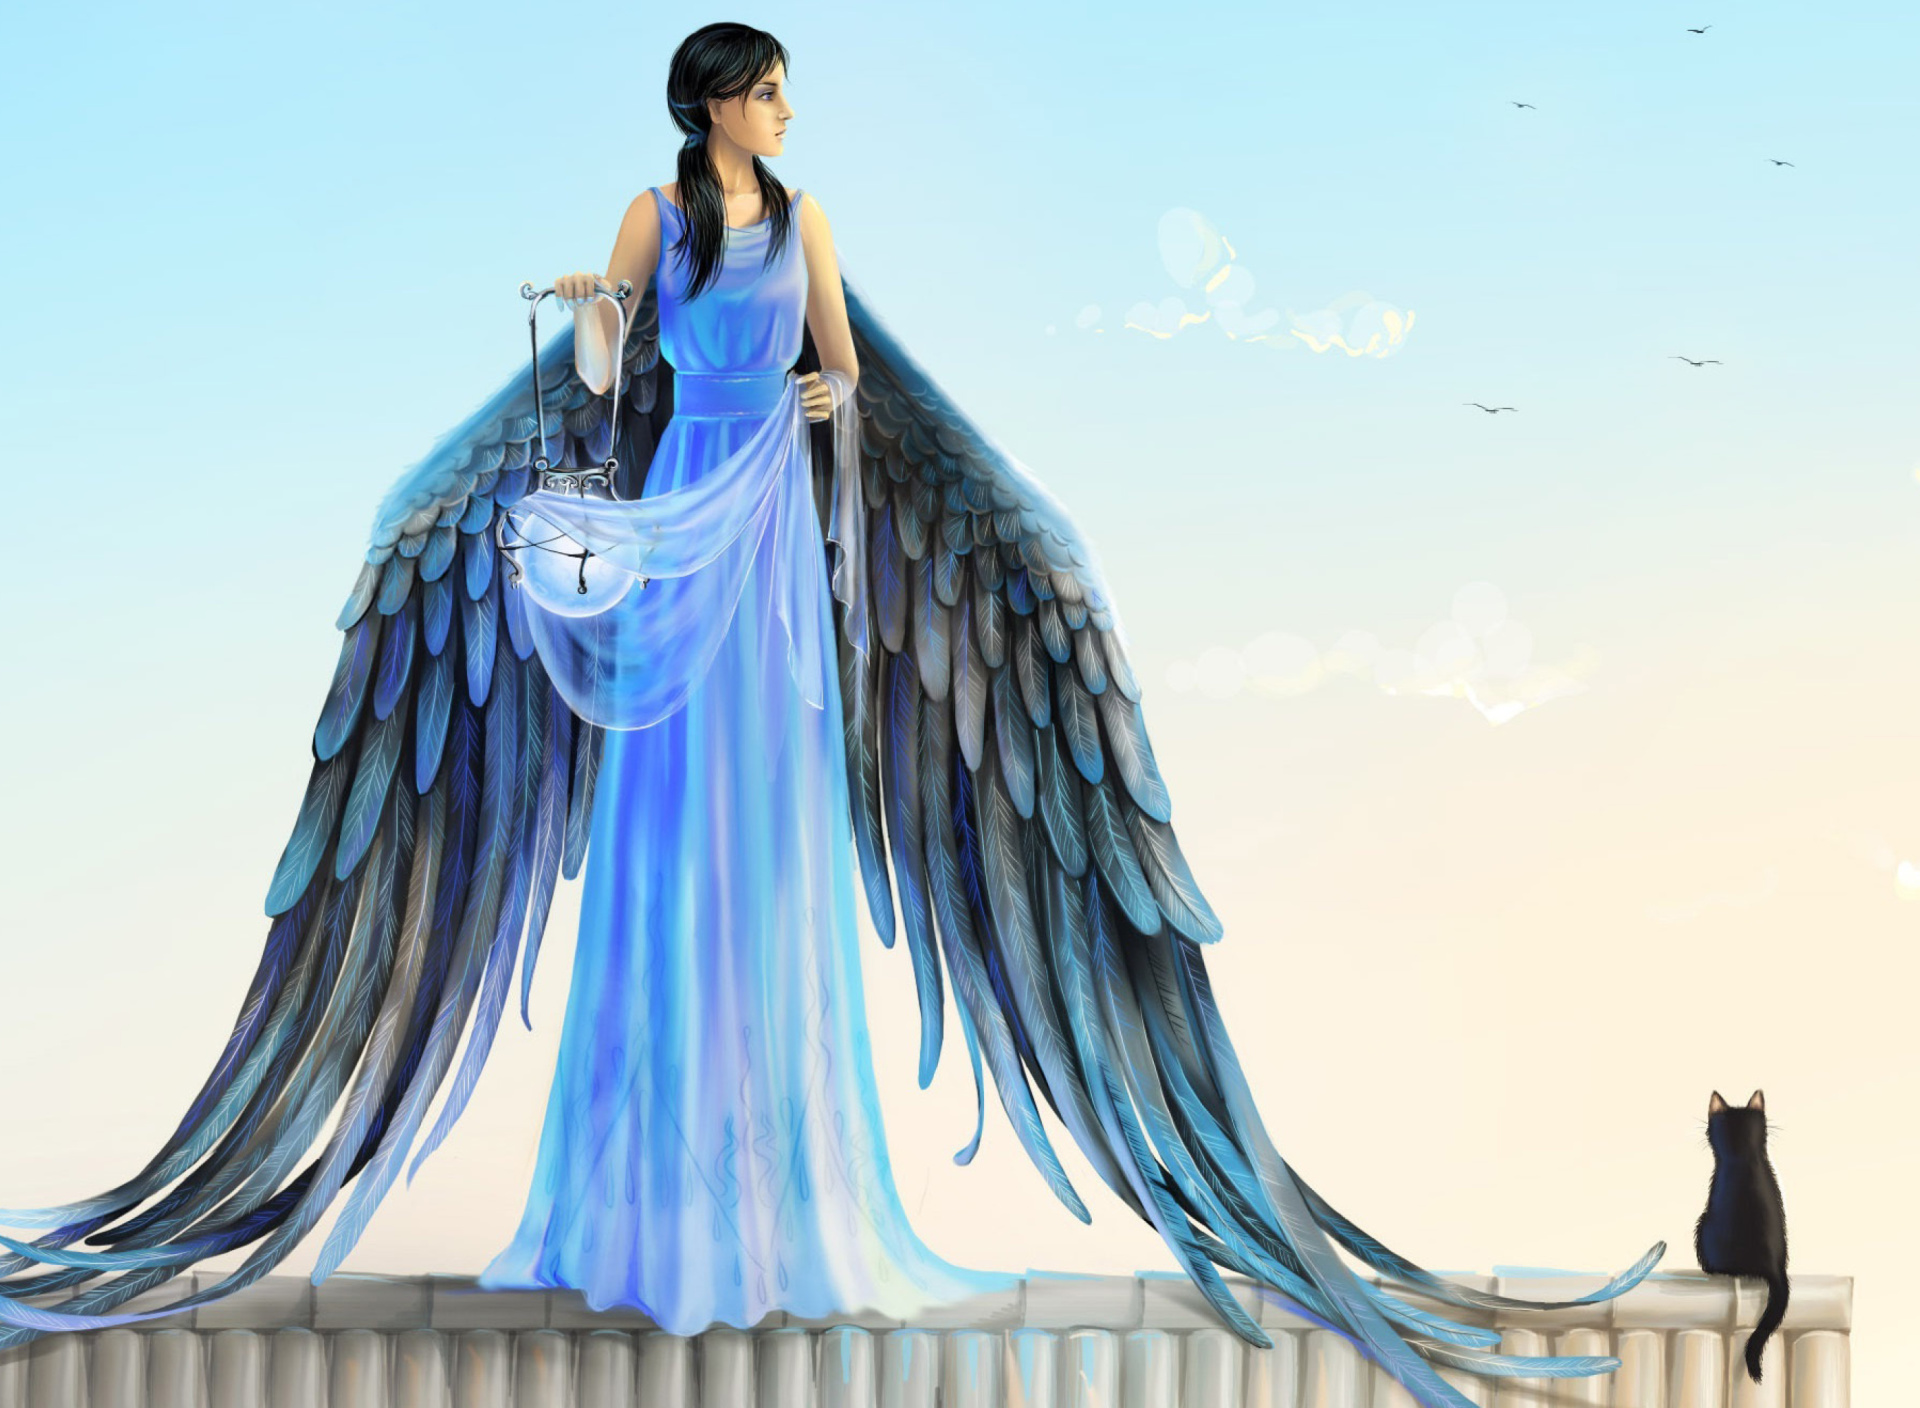 Angel with Wings wallpaper 1920x1408